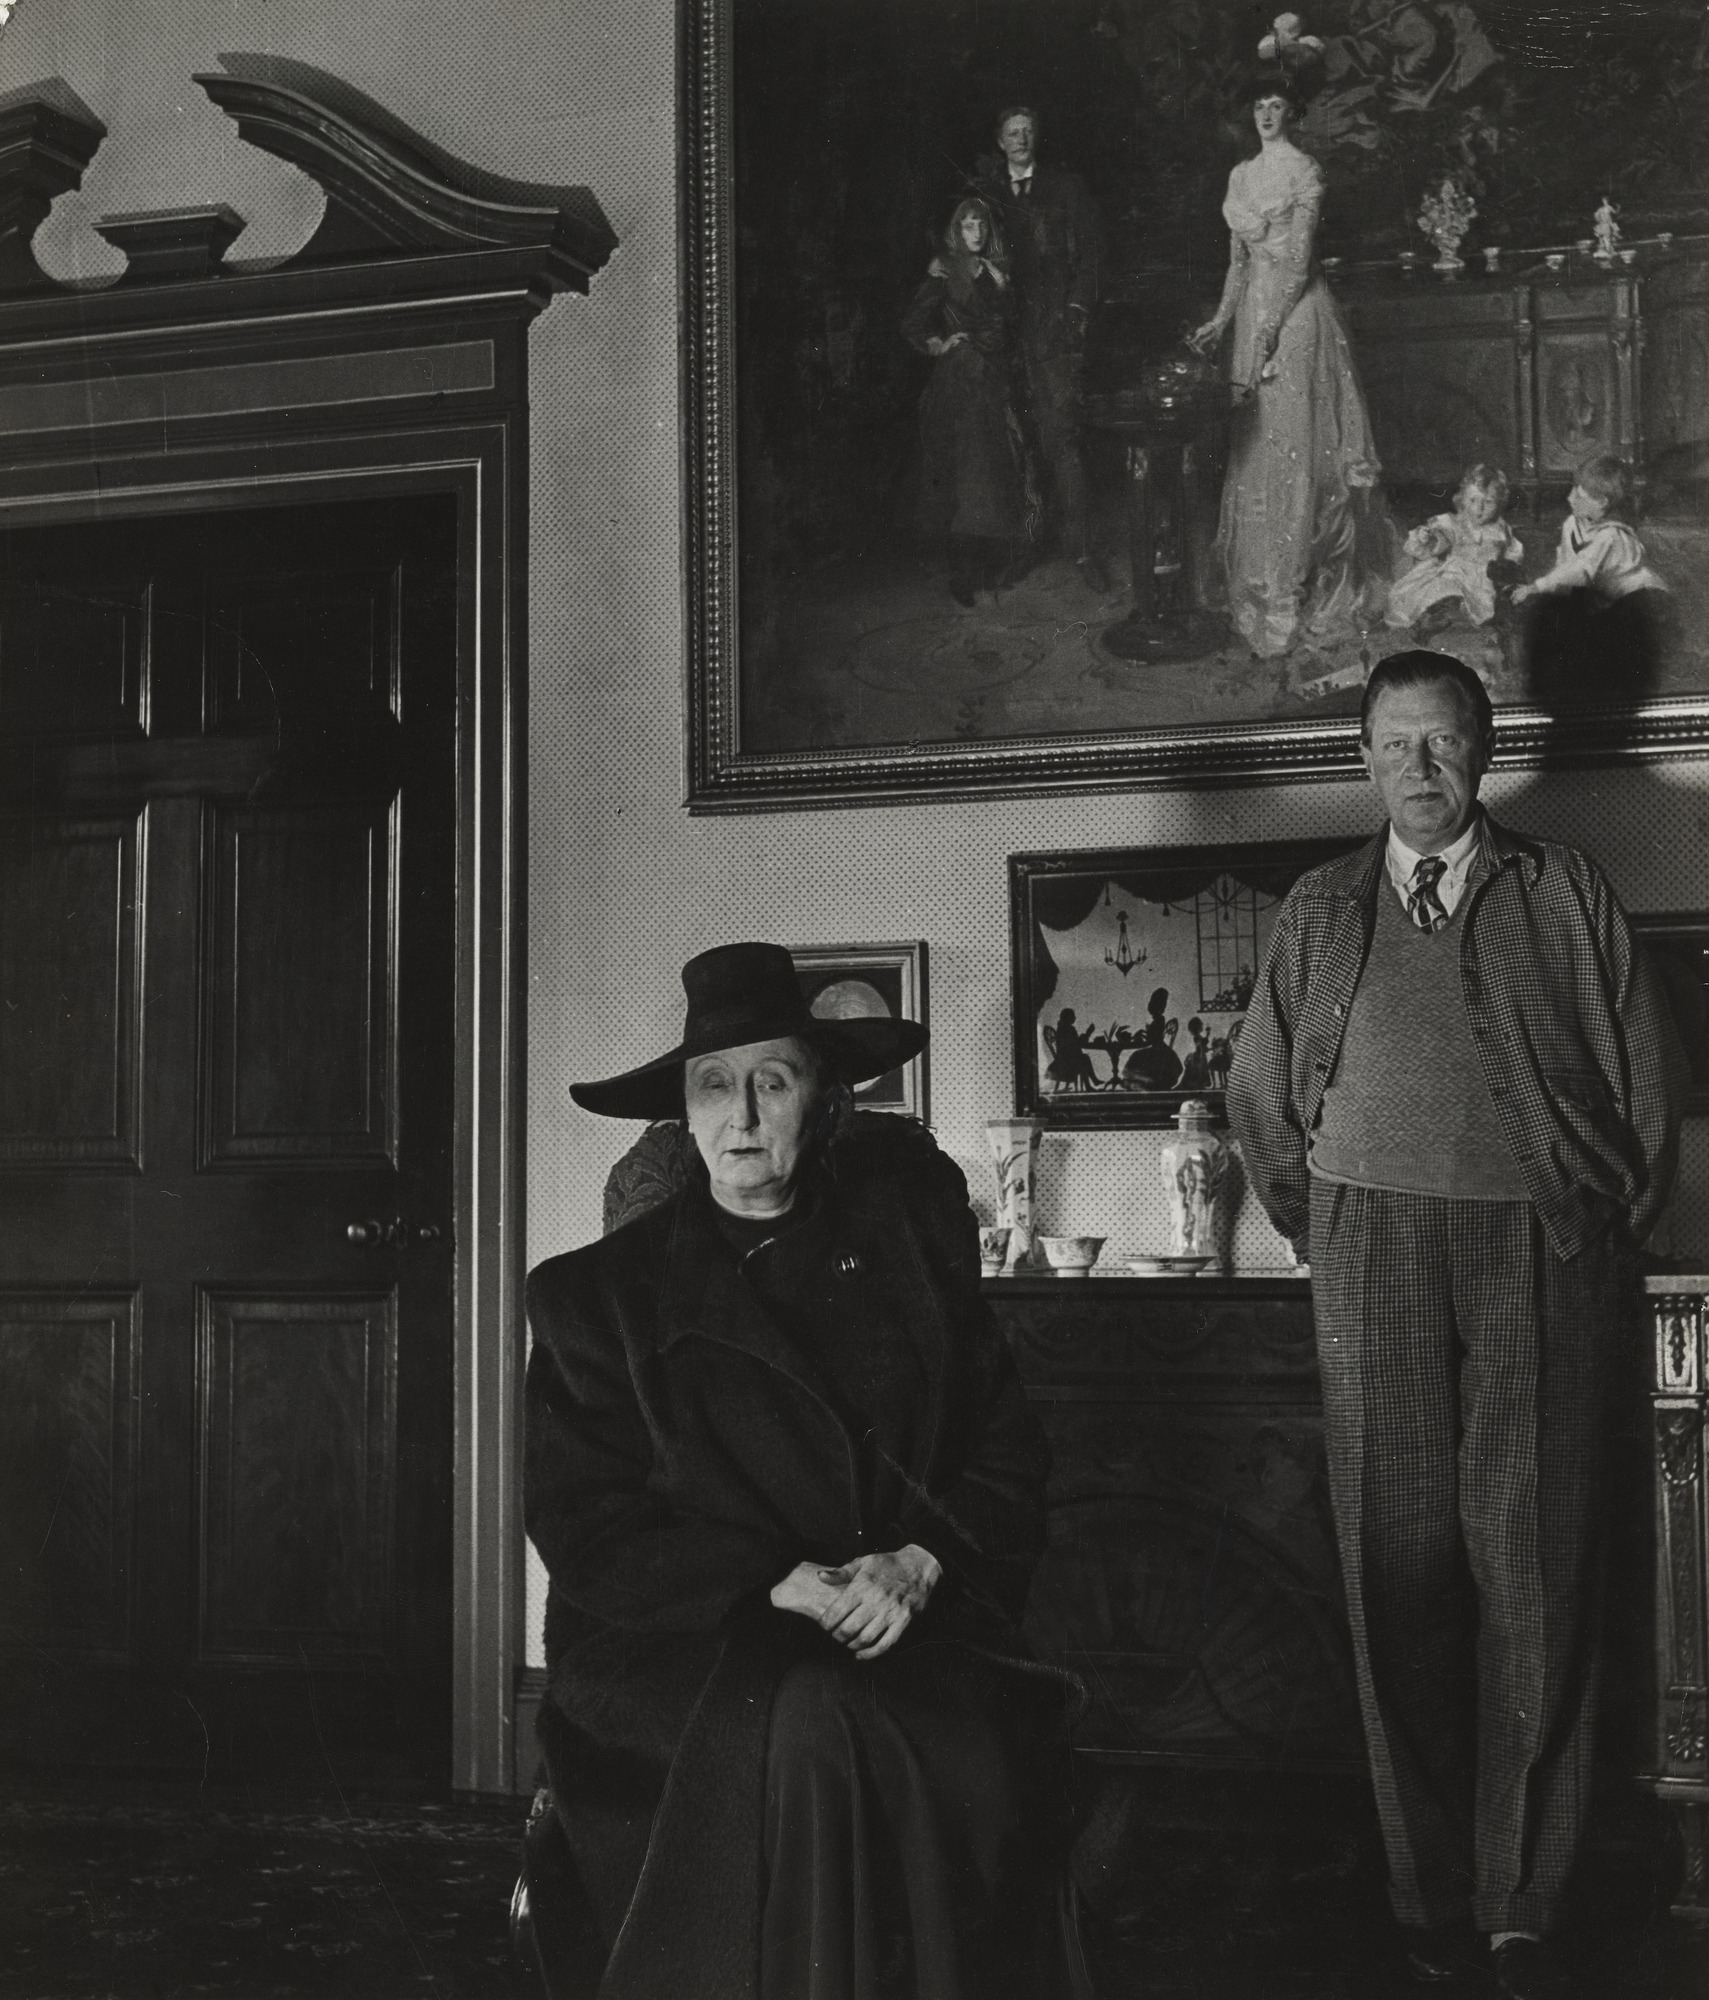 Black and white photograph of a seated woman in a black hat and a standing man in a sweater and tie in front of the painting in fig. 2.